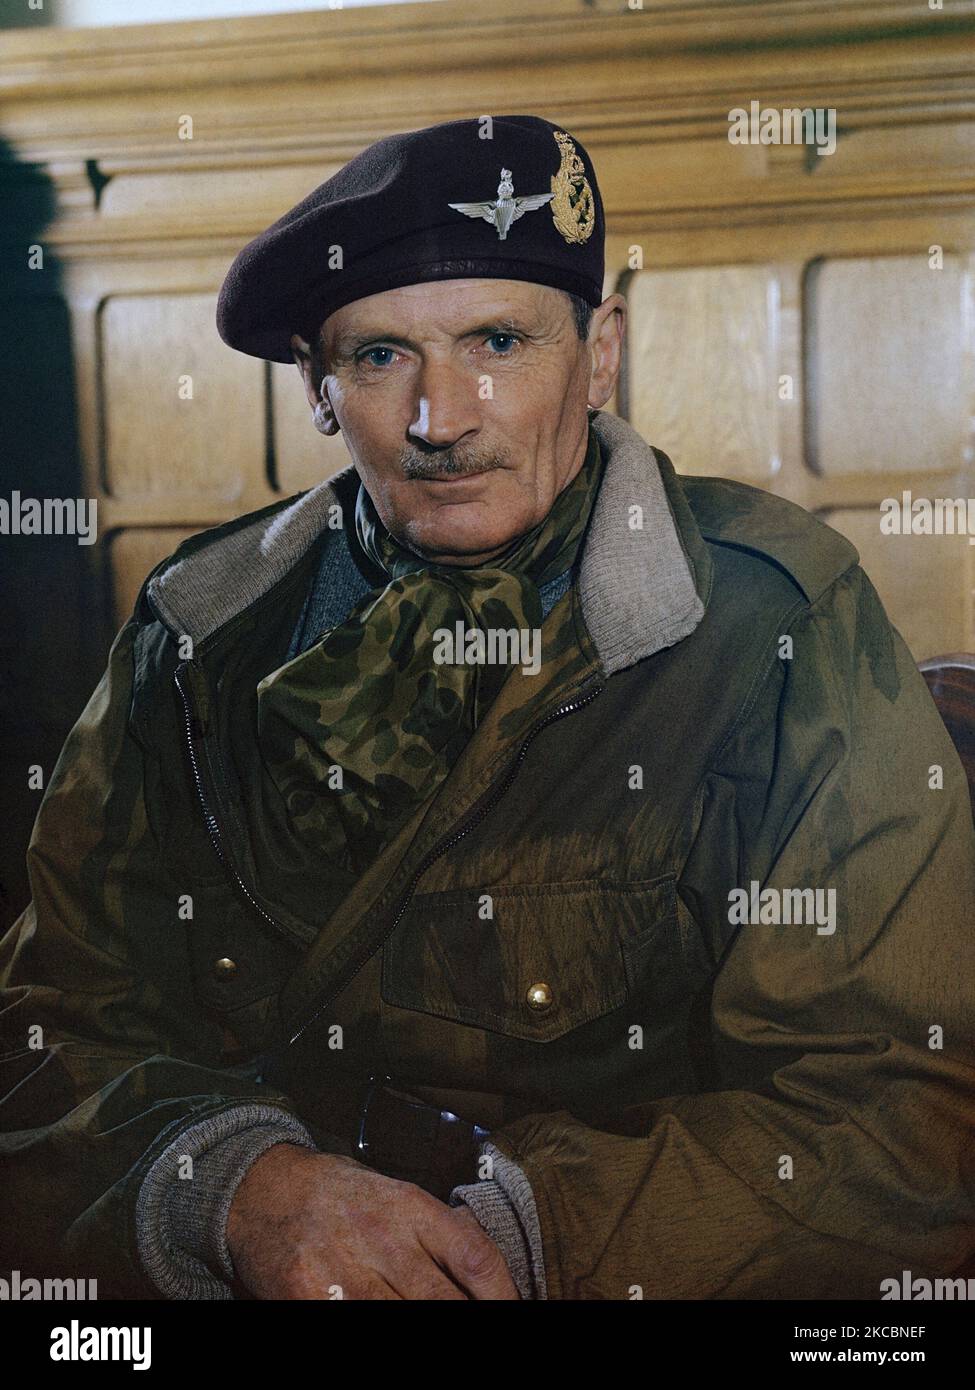 Portrait of Field Marshal Sir Bernard Montgomery of the British Army during WWII, 1944. Stock Photo